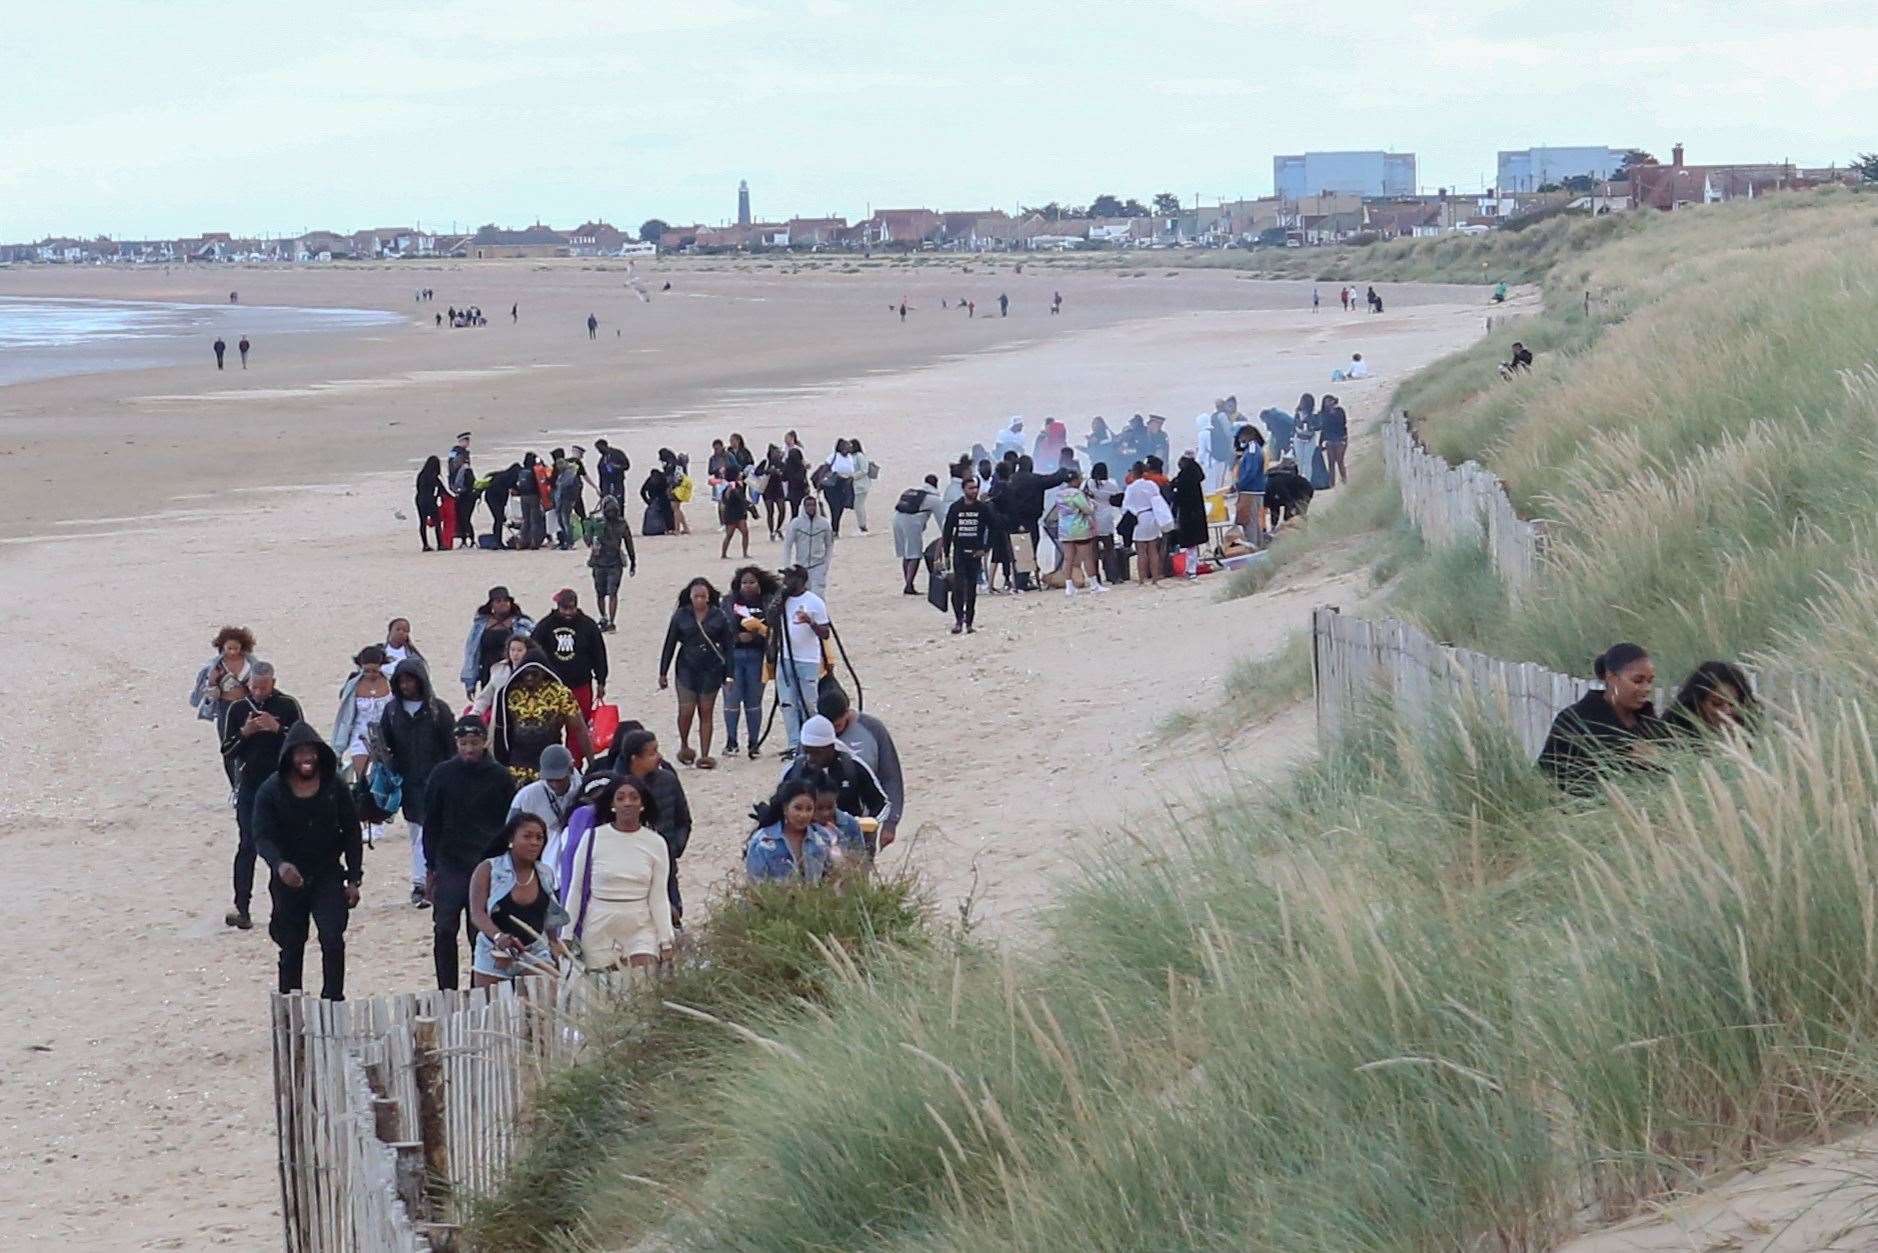 Crowds gather on the beach at Greatstone. Picture: UK News in Pictures